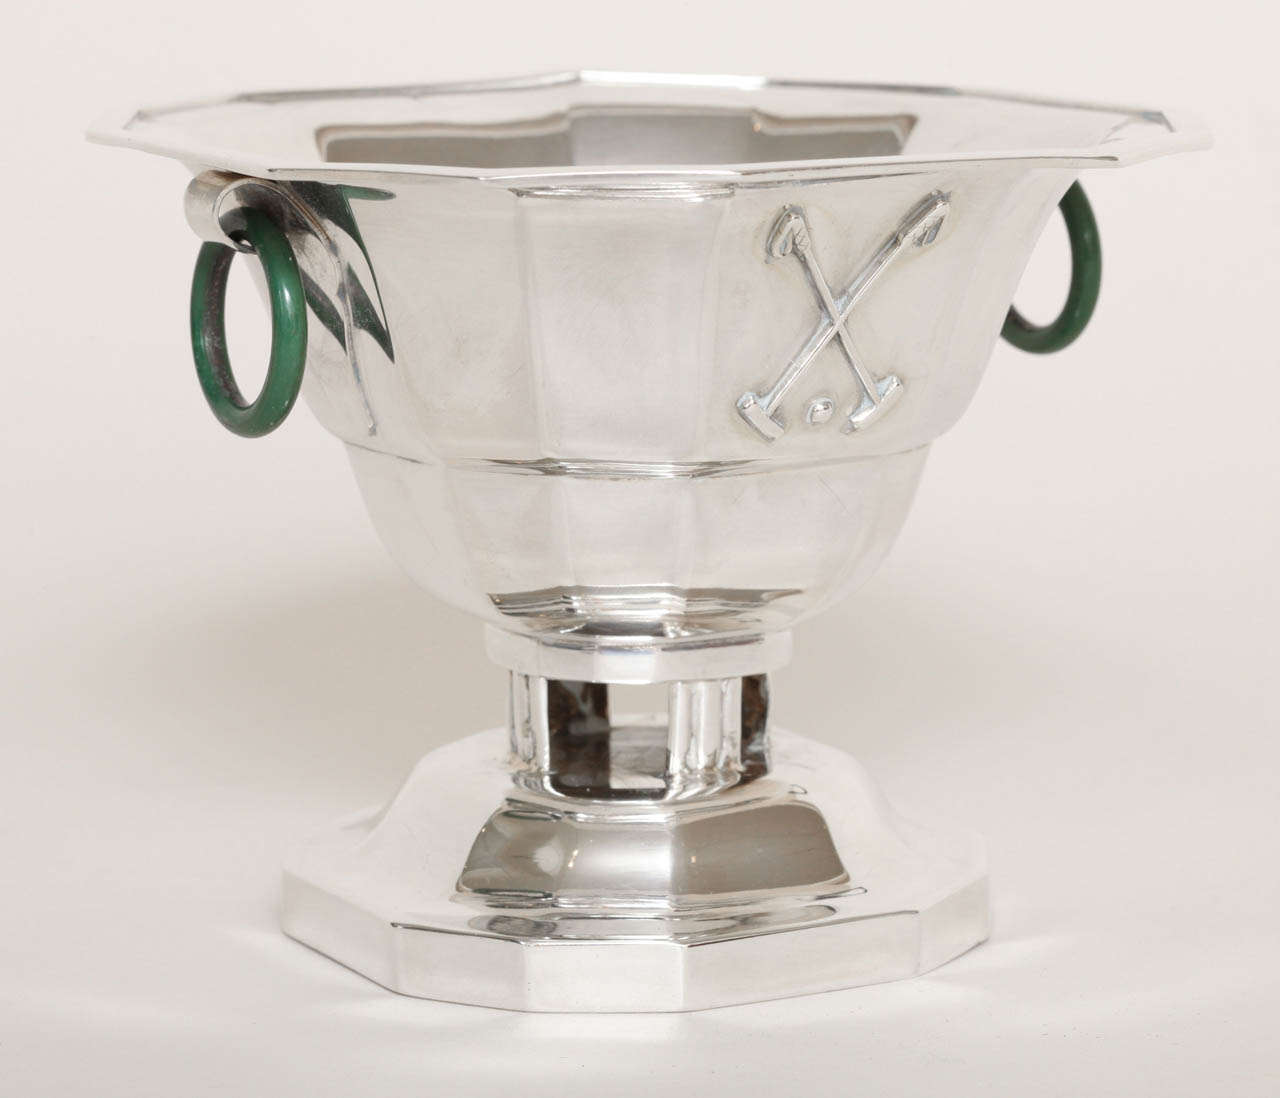 Octagonal sterling silver coupe mounted on an octagonal silver base with image of crossed polo mallets and ball on one side, with two circular jade rings
8.70 oz. Gross
Hallmarks: 950 silver/ Cardeilhac/ Jacques & Pierre Cardeilhac poincon.